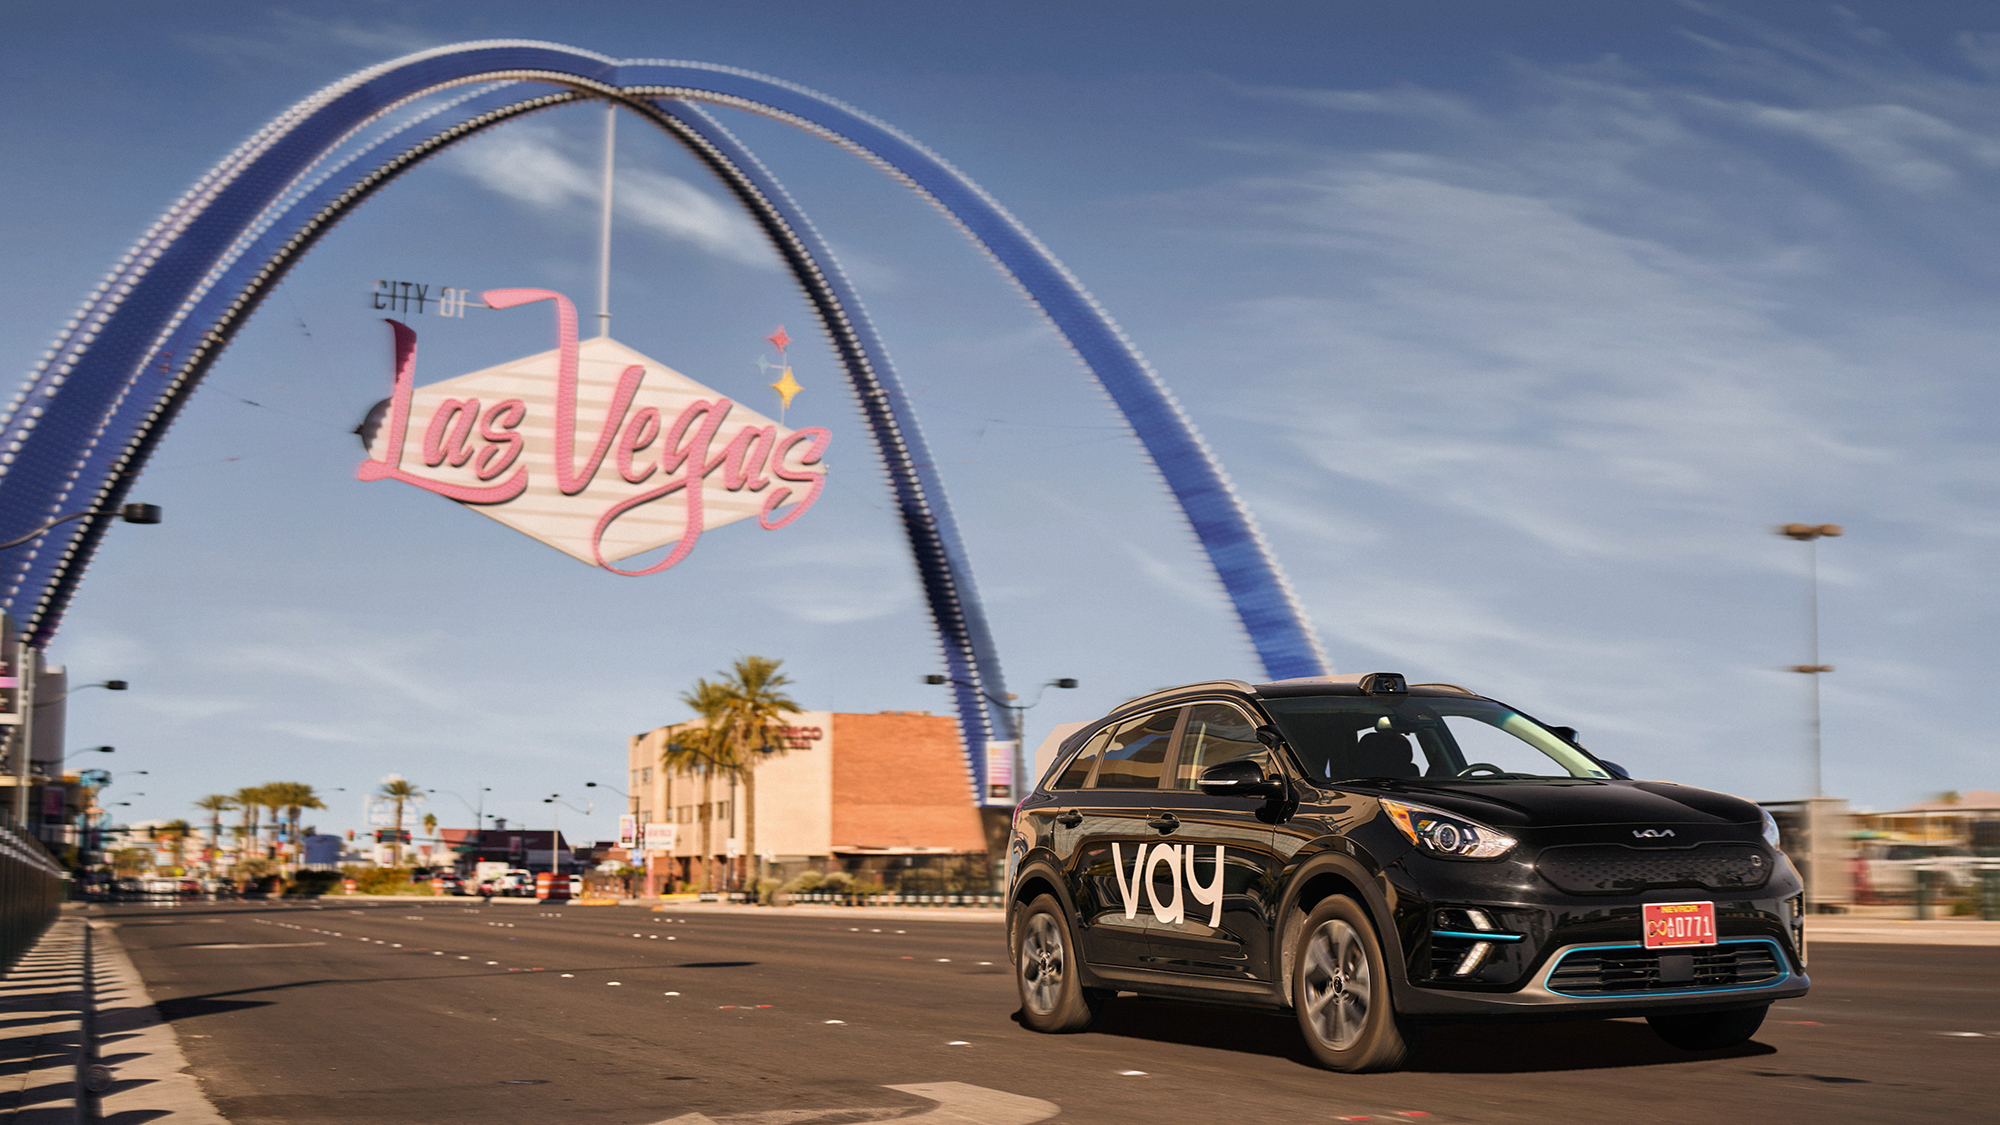 What is teledriving? Remotely operated cars offer an alternative to ‘driverless’ taxis in Las Vegas